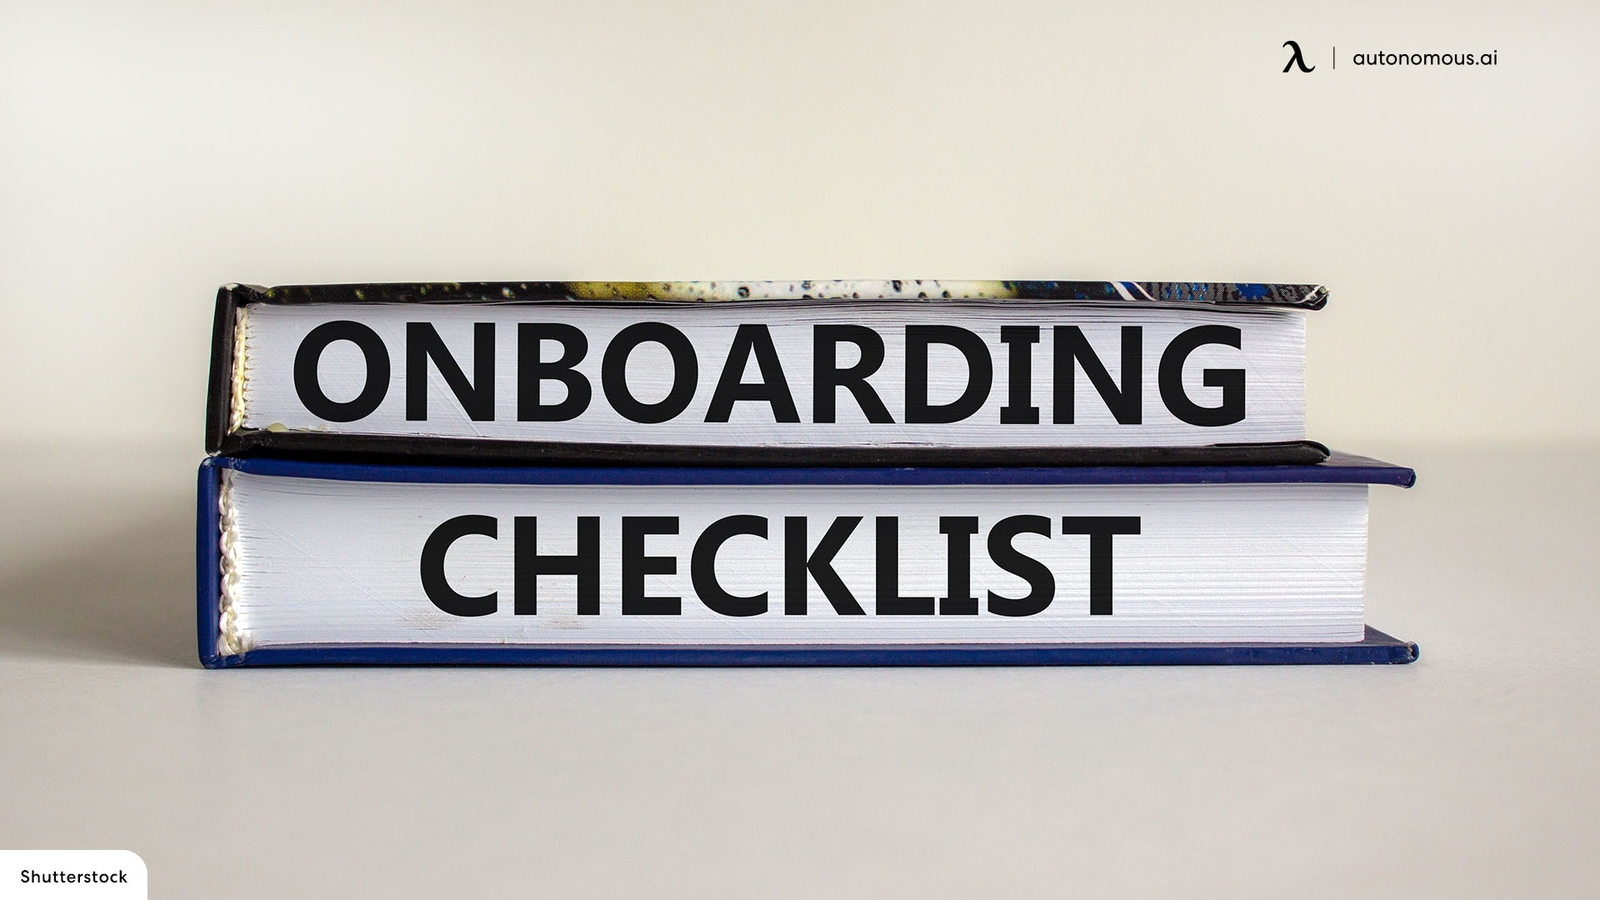 5 Steps for an Onboarding Checklist (Ultimate Guide)